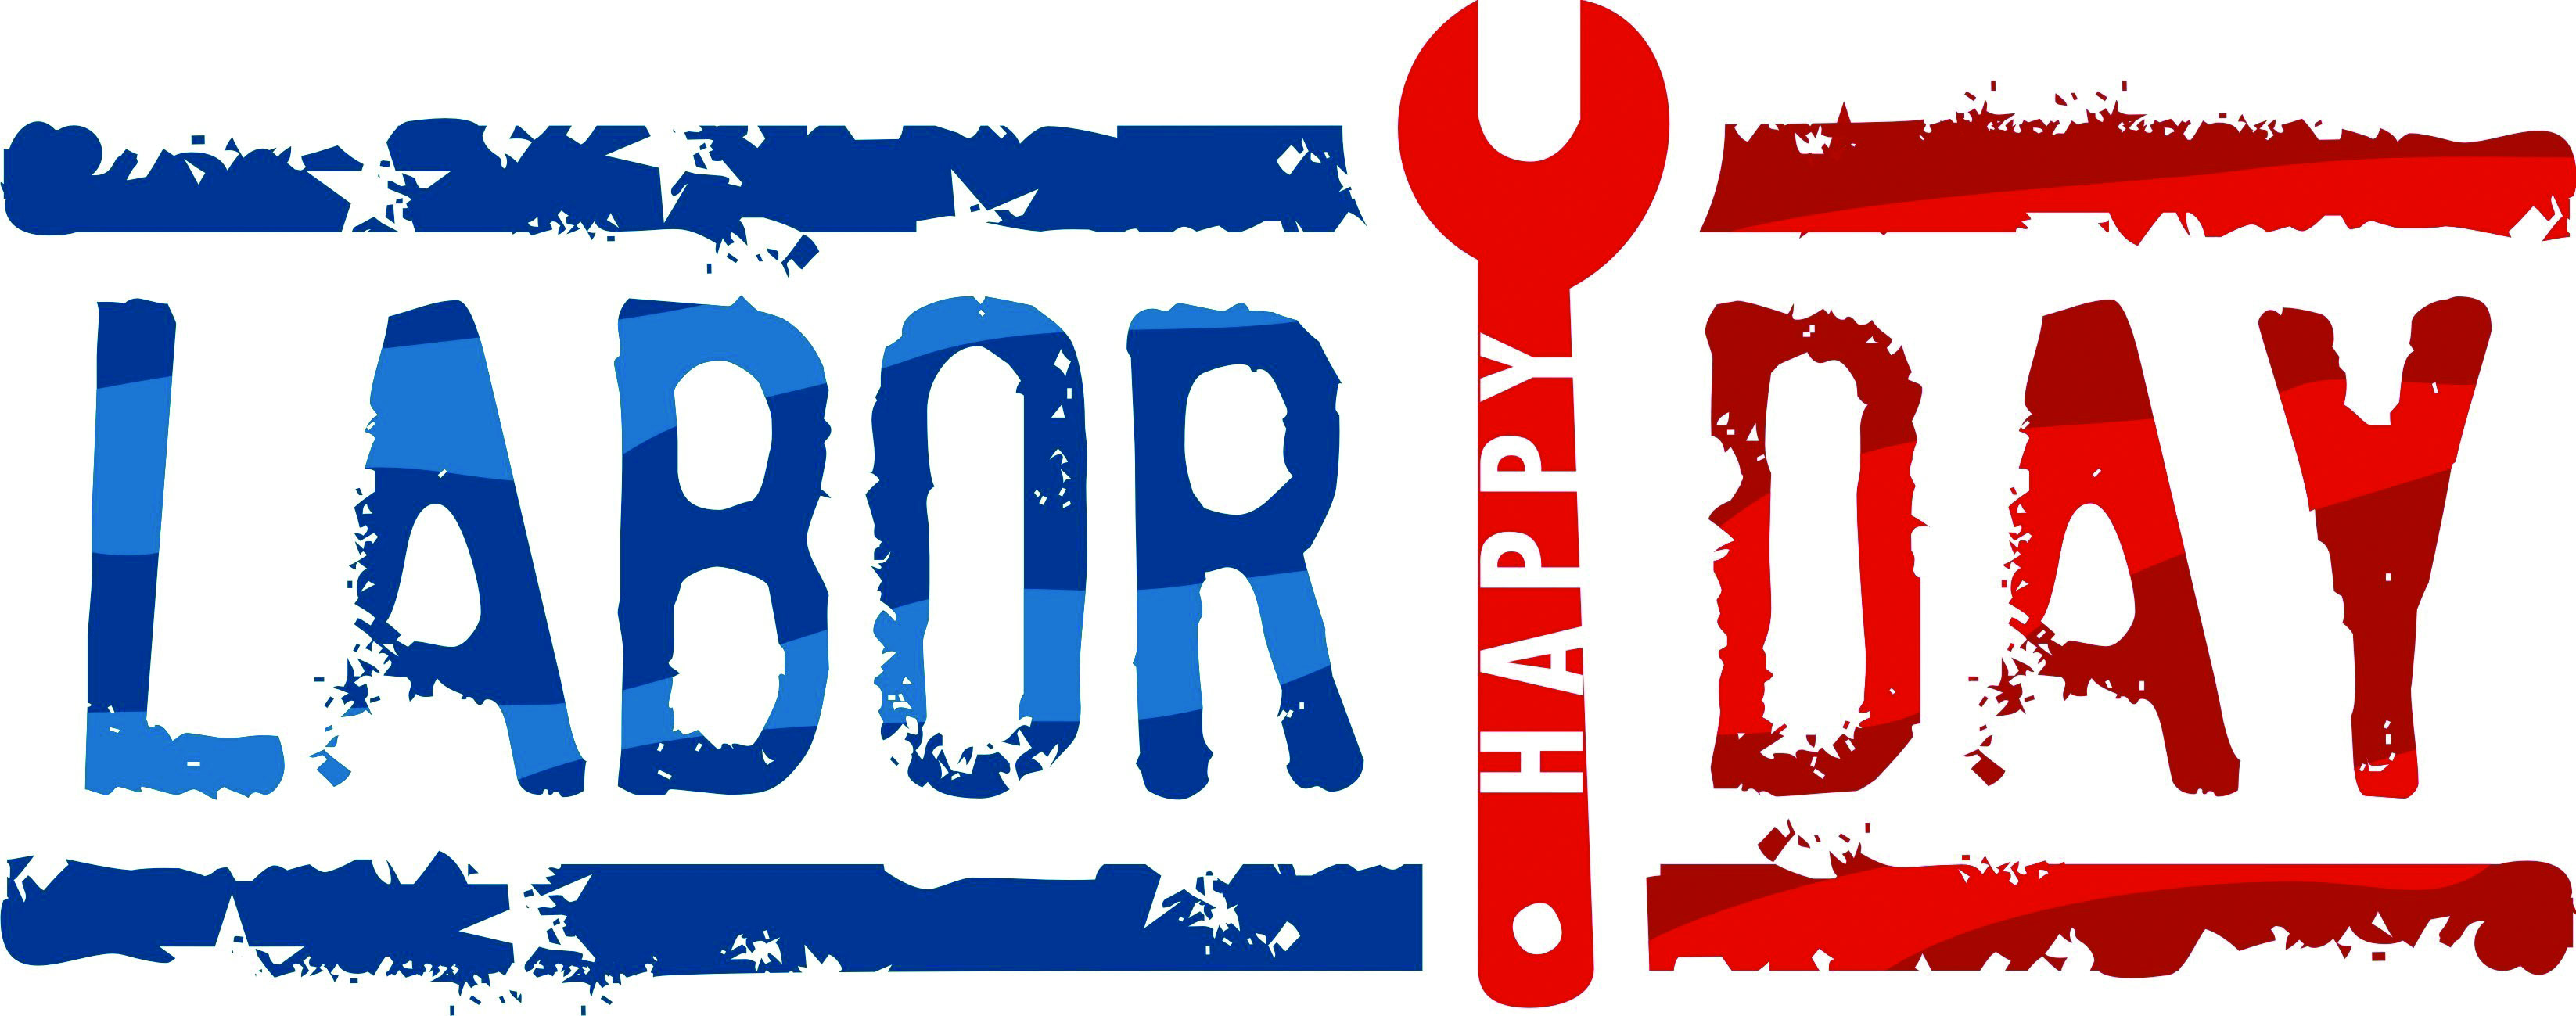 Farewell To Summer-  5 Suggestions for The Ultimate Labor Day Party!  By Stacy Kivett